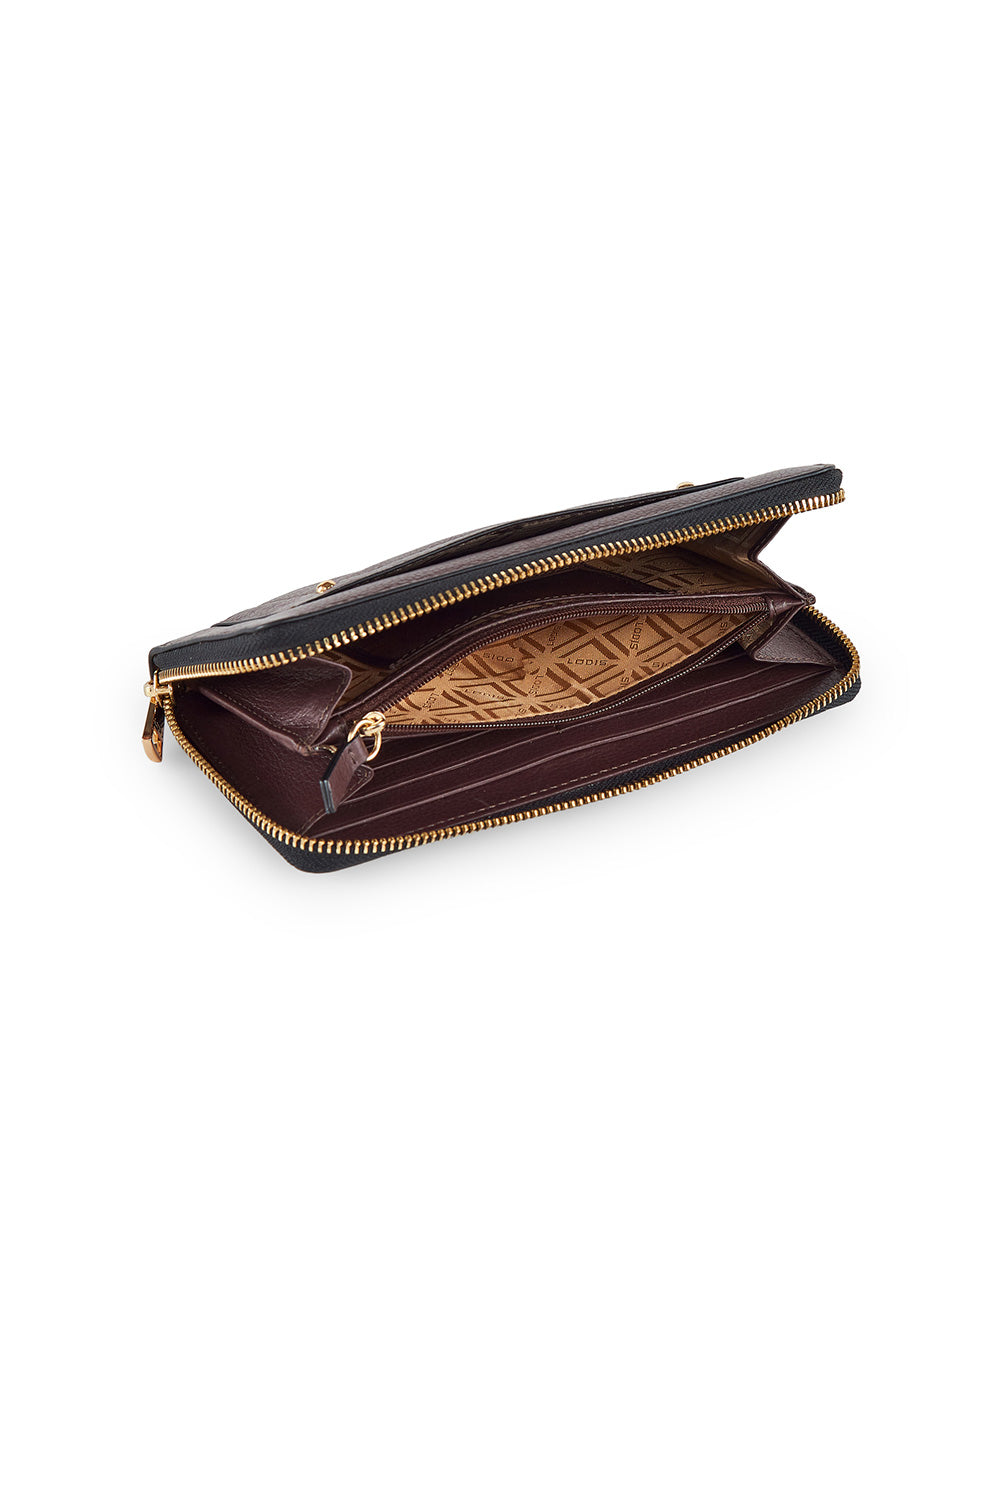 443436 MARMONT CONTINENTAL WALLET Designer Womens Long Flap Leather Wallets  Card Holder Zip Coin Slim Purse Key Pouch Mini Pochette Accessoires Cles  Cardholder From Jerseyland020, $35.54